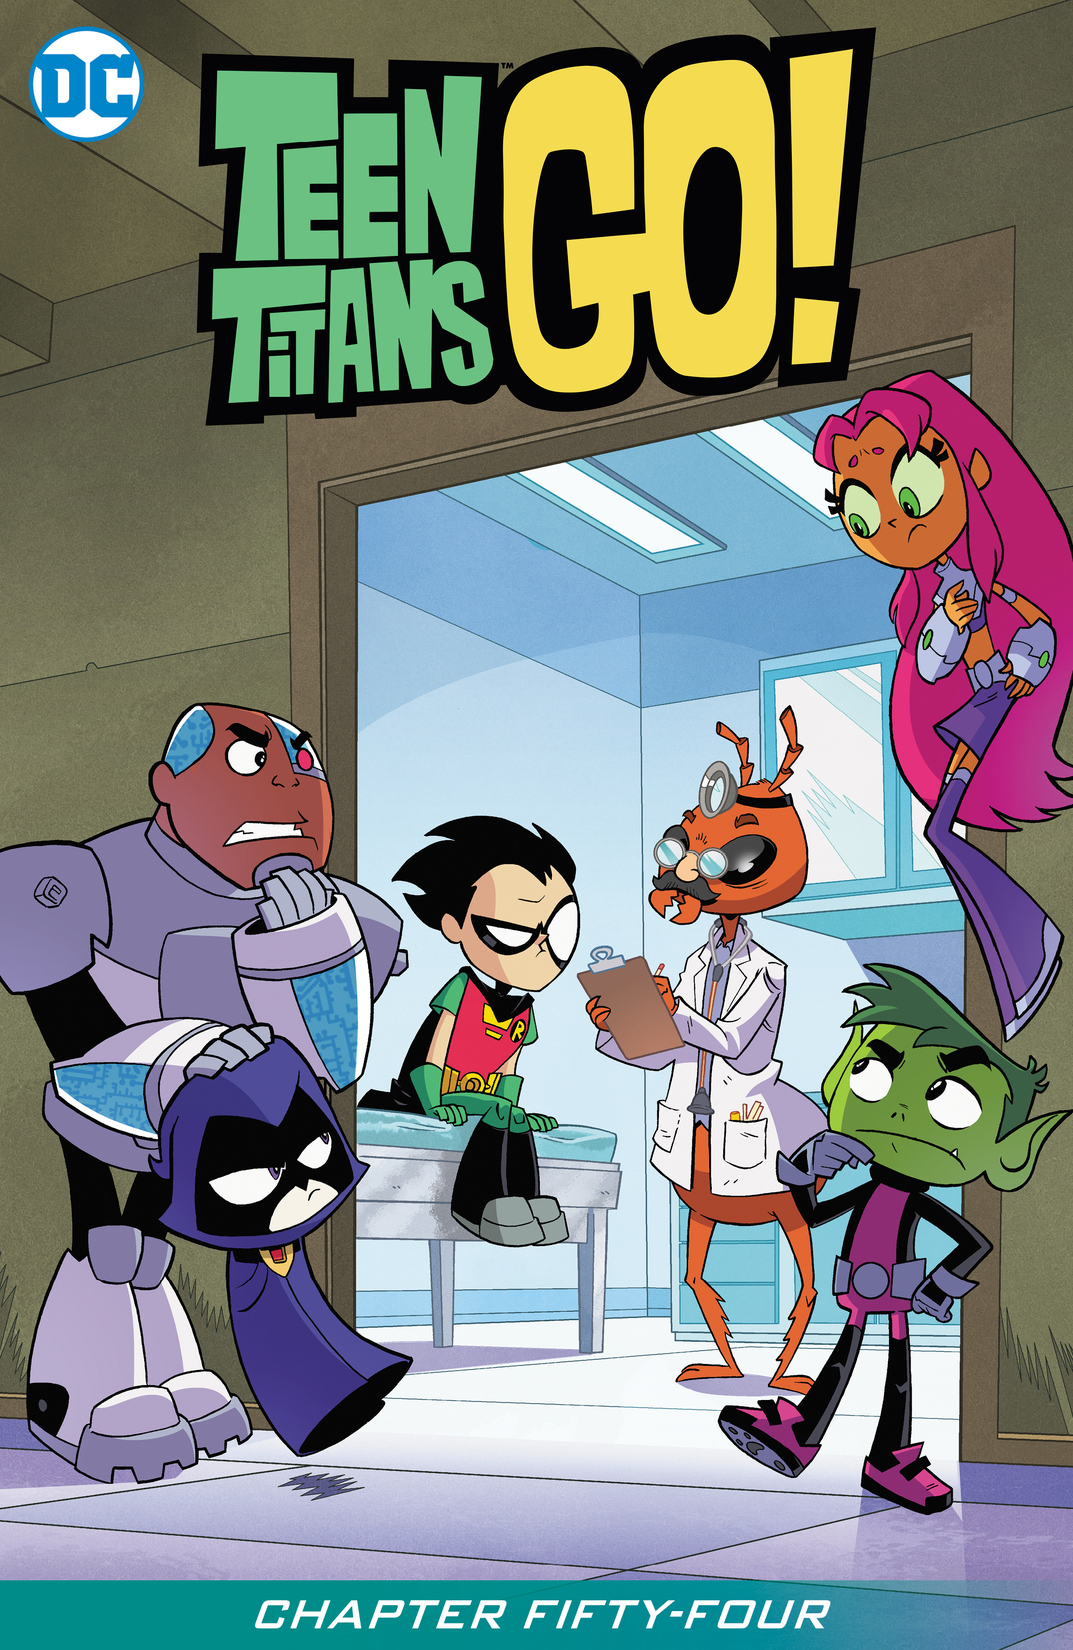 Teen Titans Go! (2013-) #54 preview images